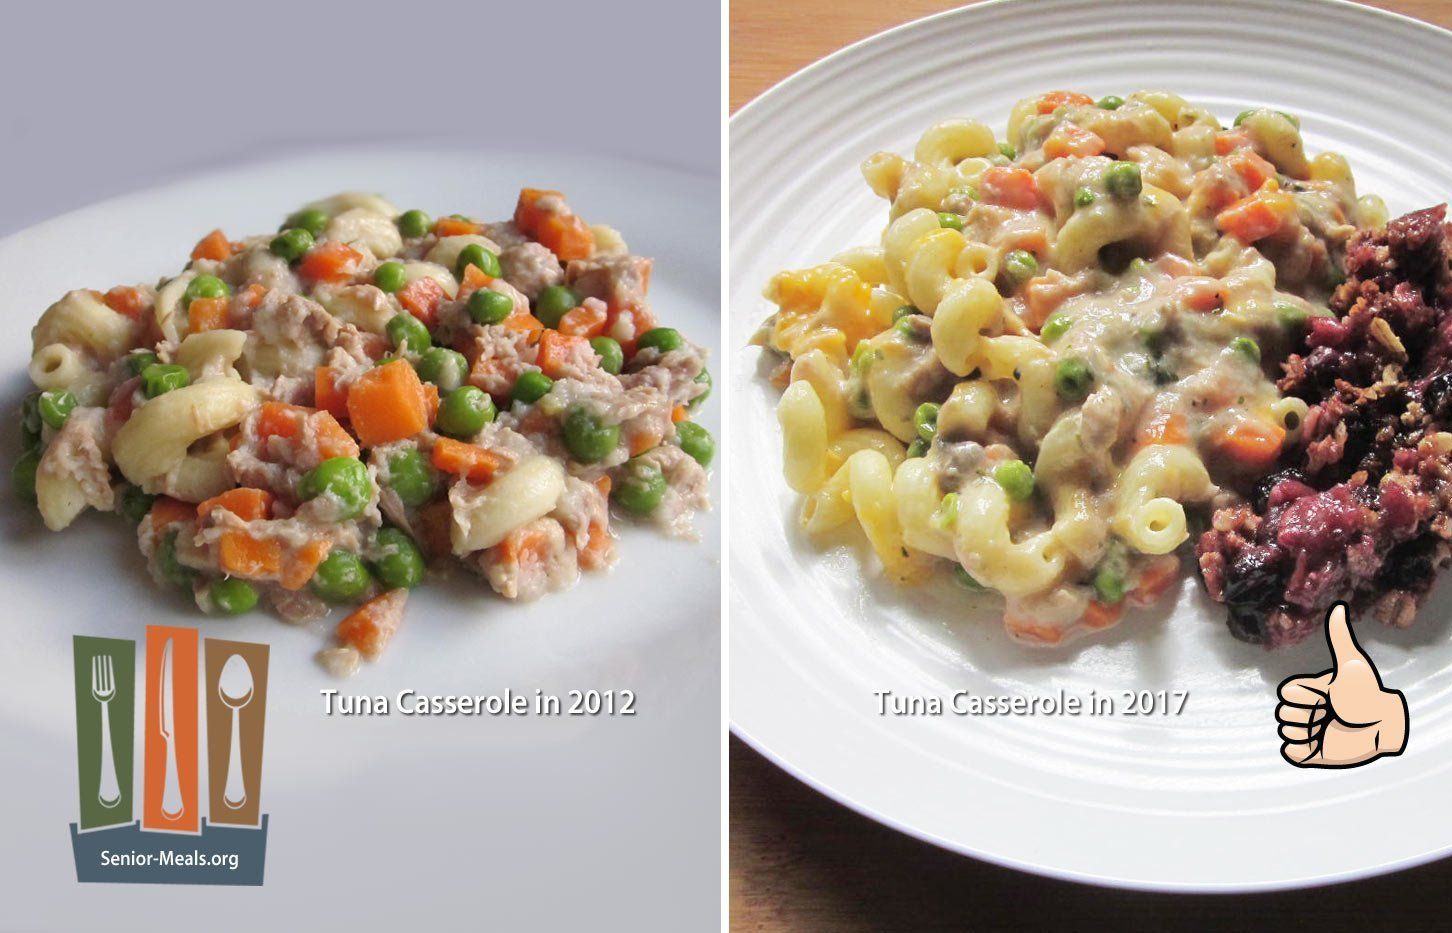 Tuna Casserole Much Better and Larger Portion Size